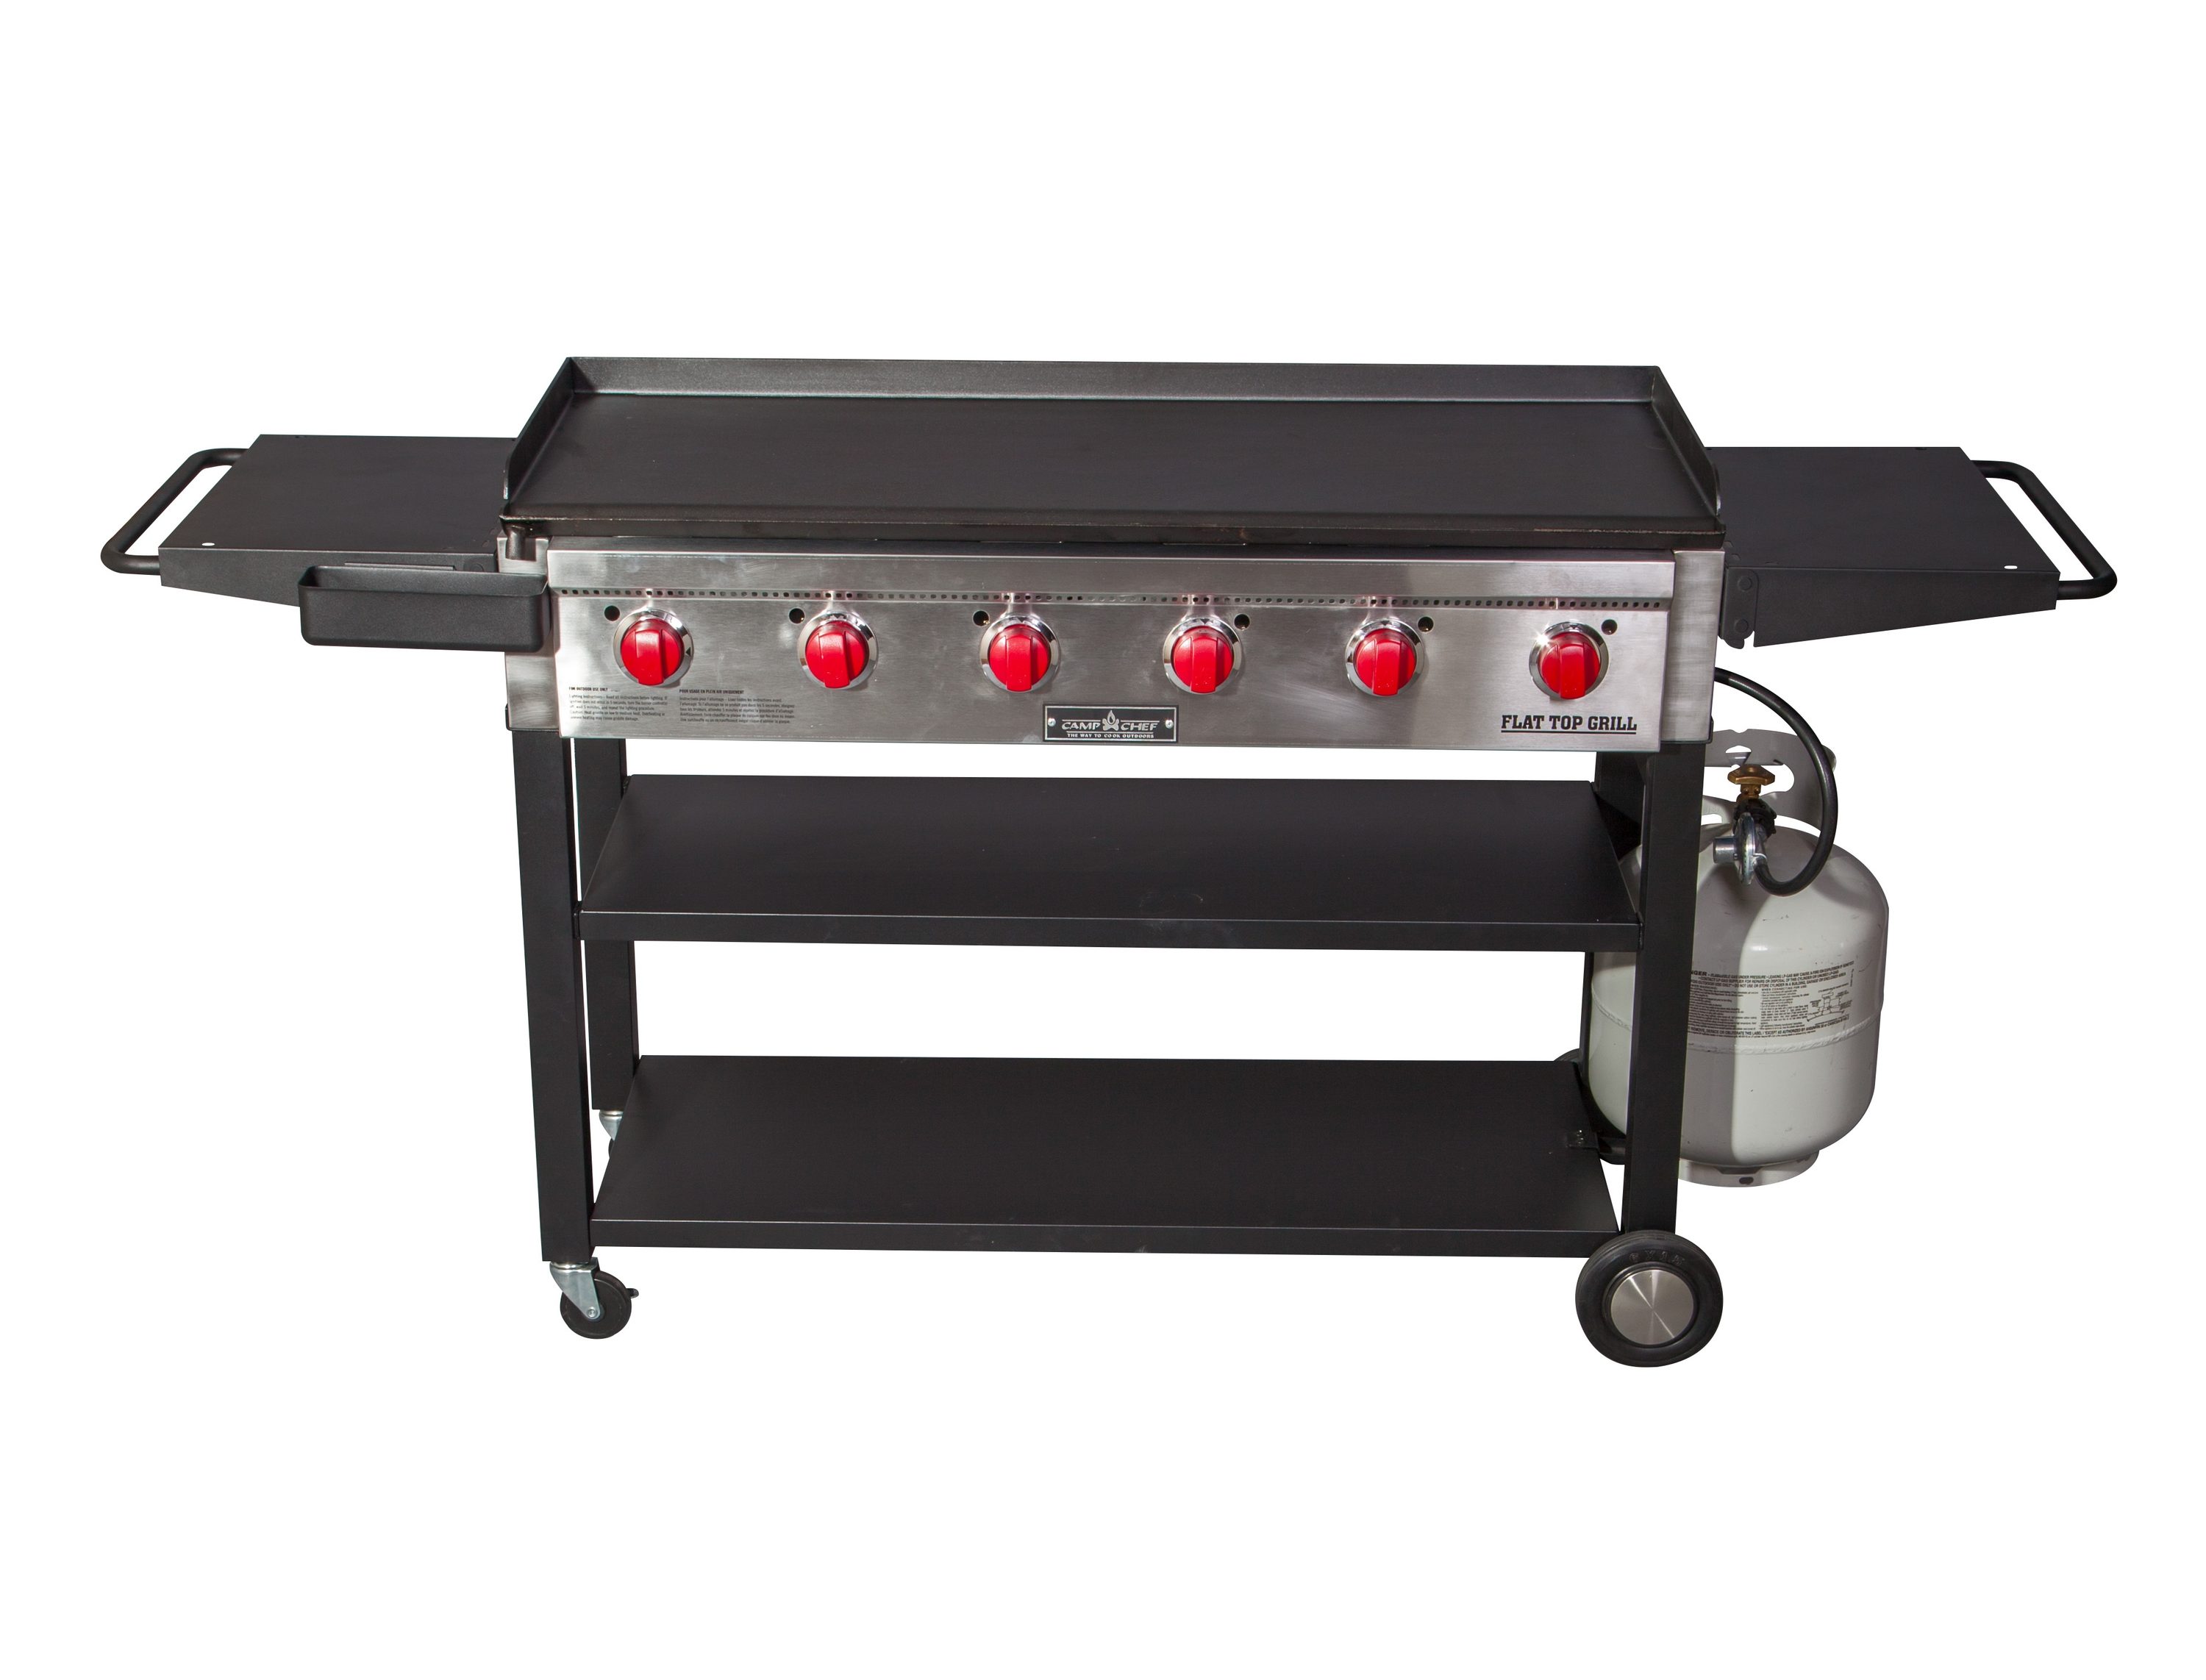 17 inch Portable Propane Flat Top BBQ Grill Griddle for Outdoor, Camping, Kitchen, Tailgating Etc, Kit with Grill Bag